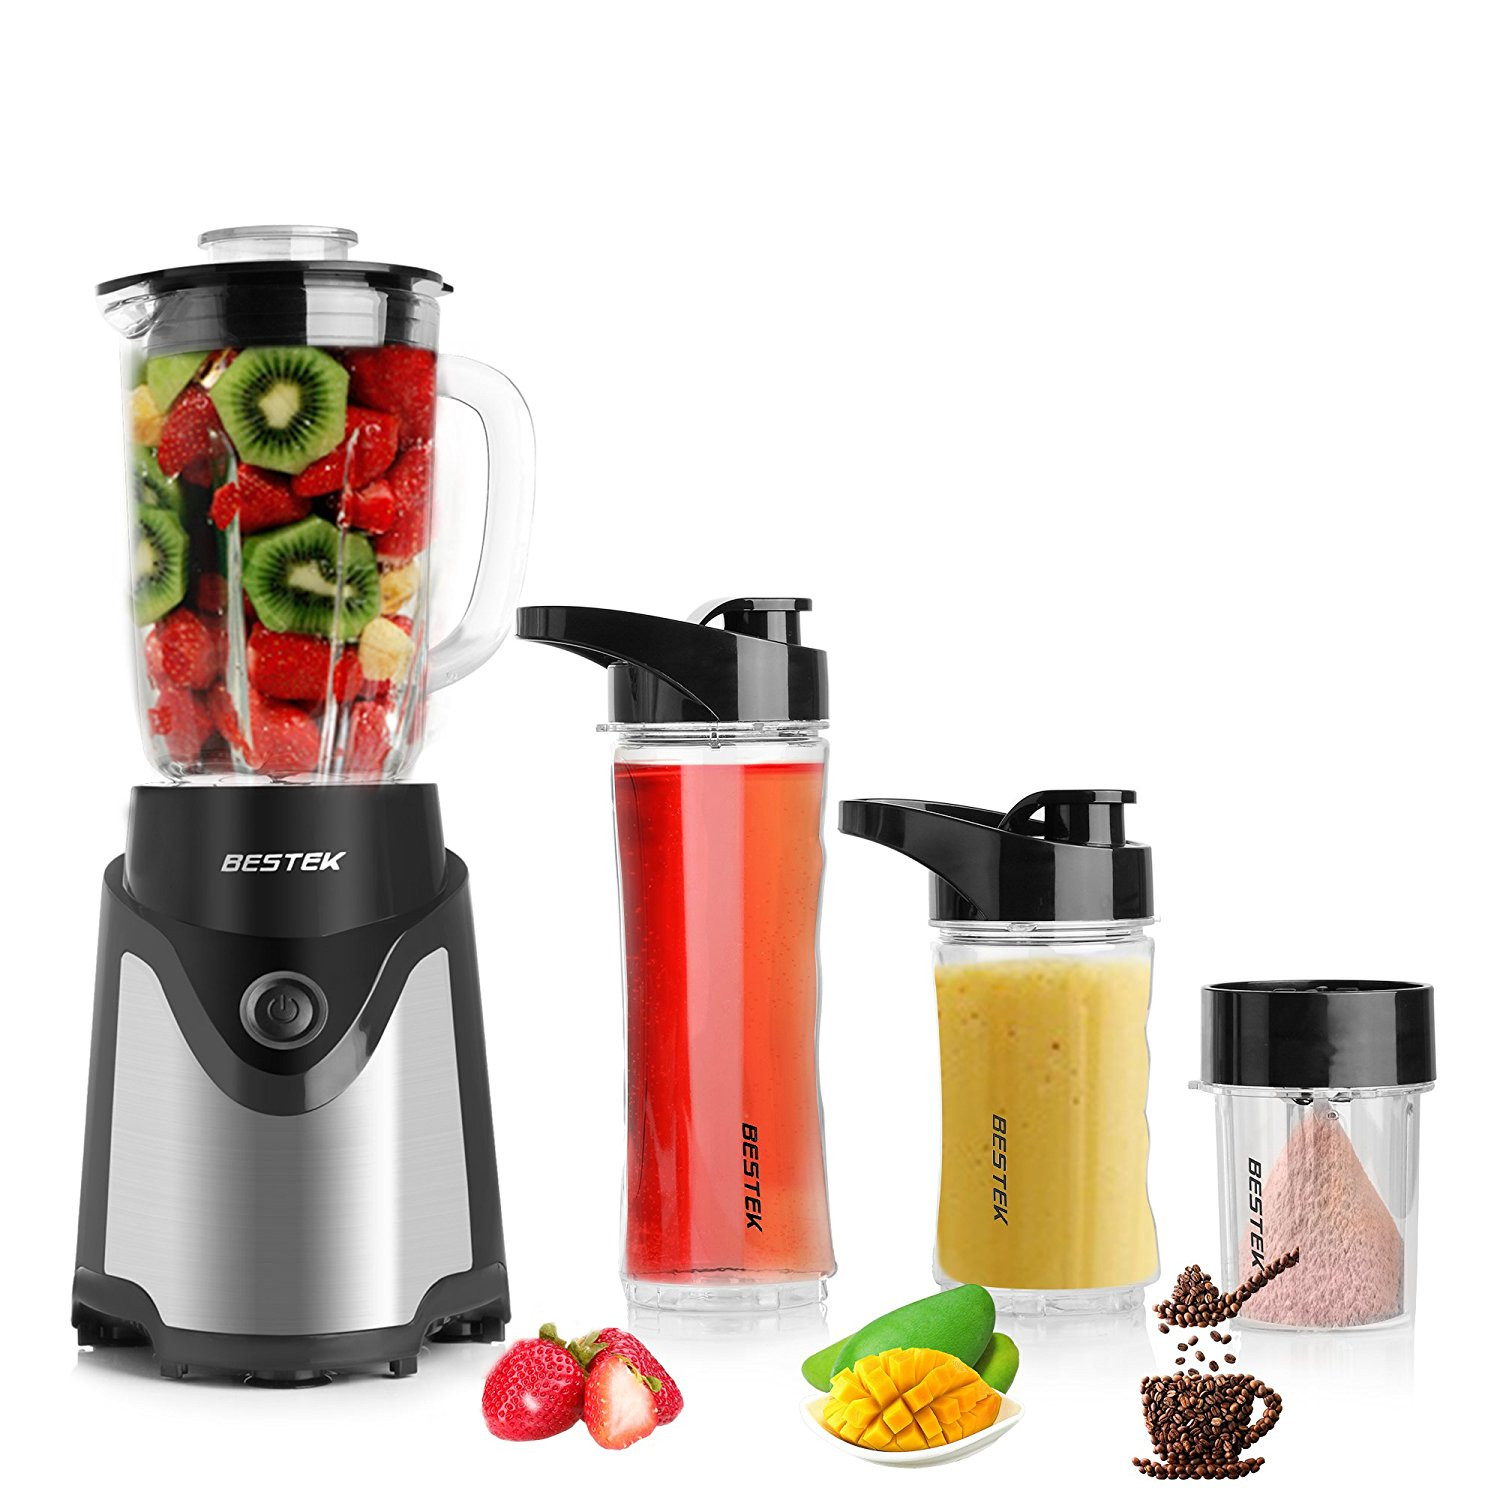 Blender For Smoothies
 Top 10 Best Personal Blenders for Smoothies Fruit